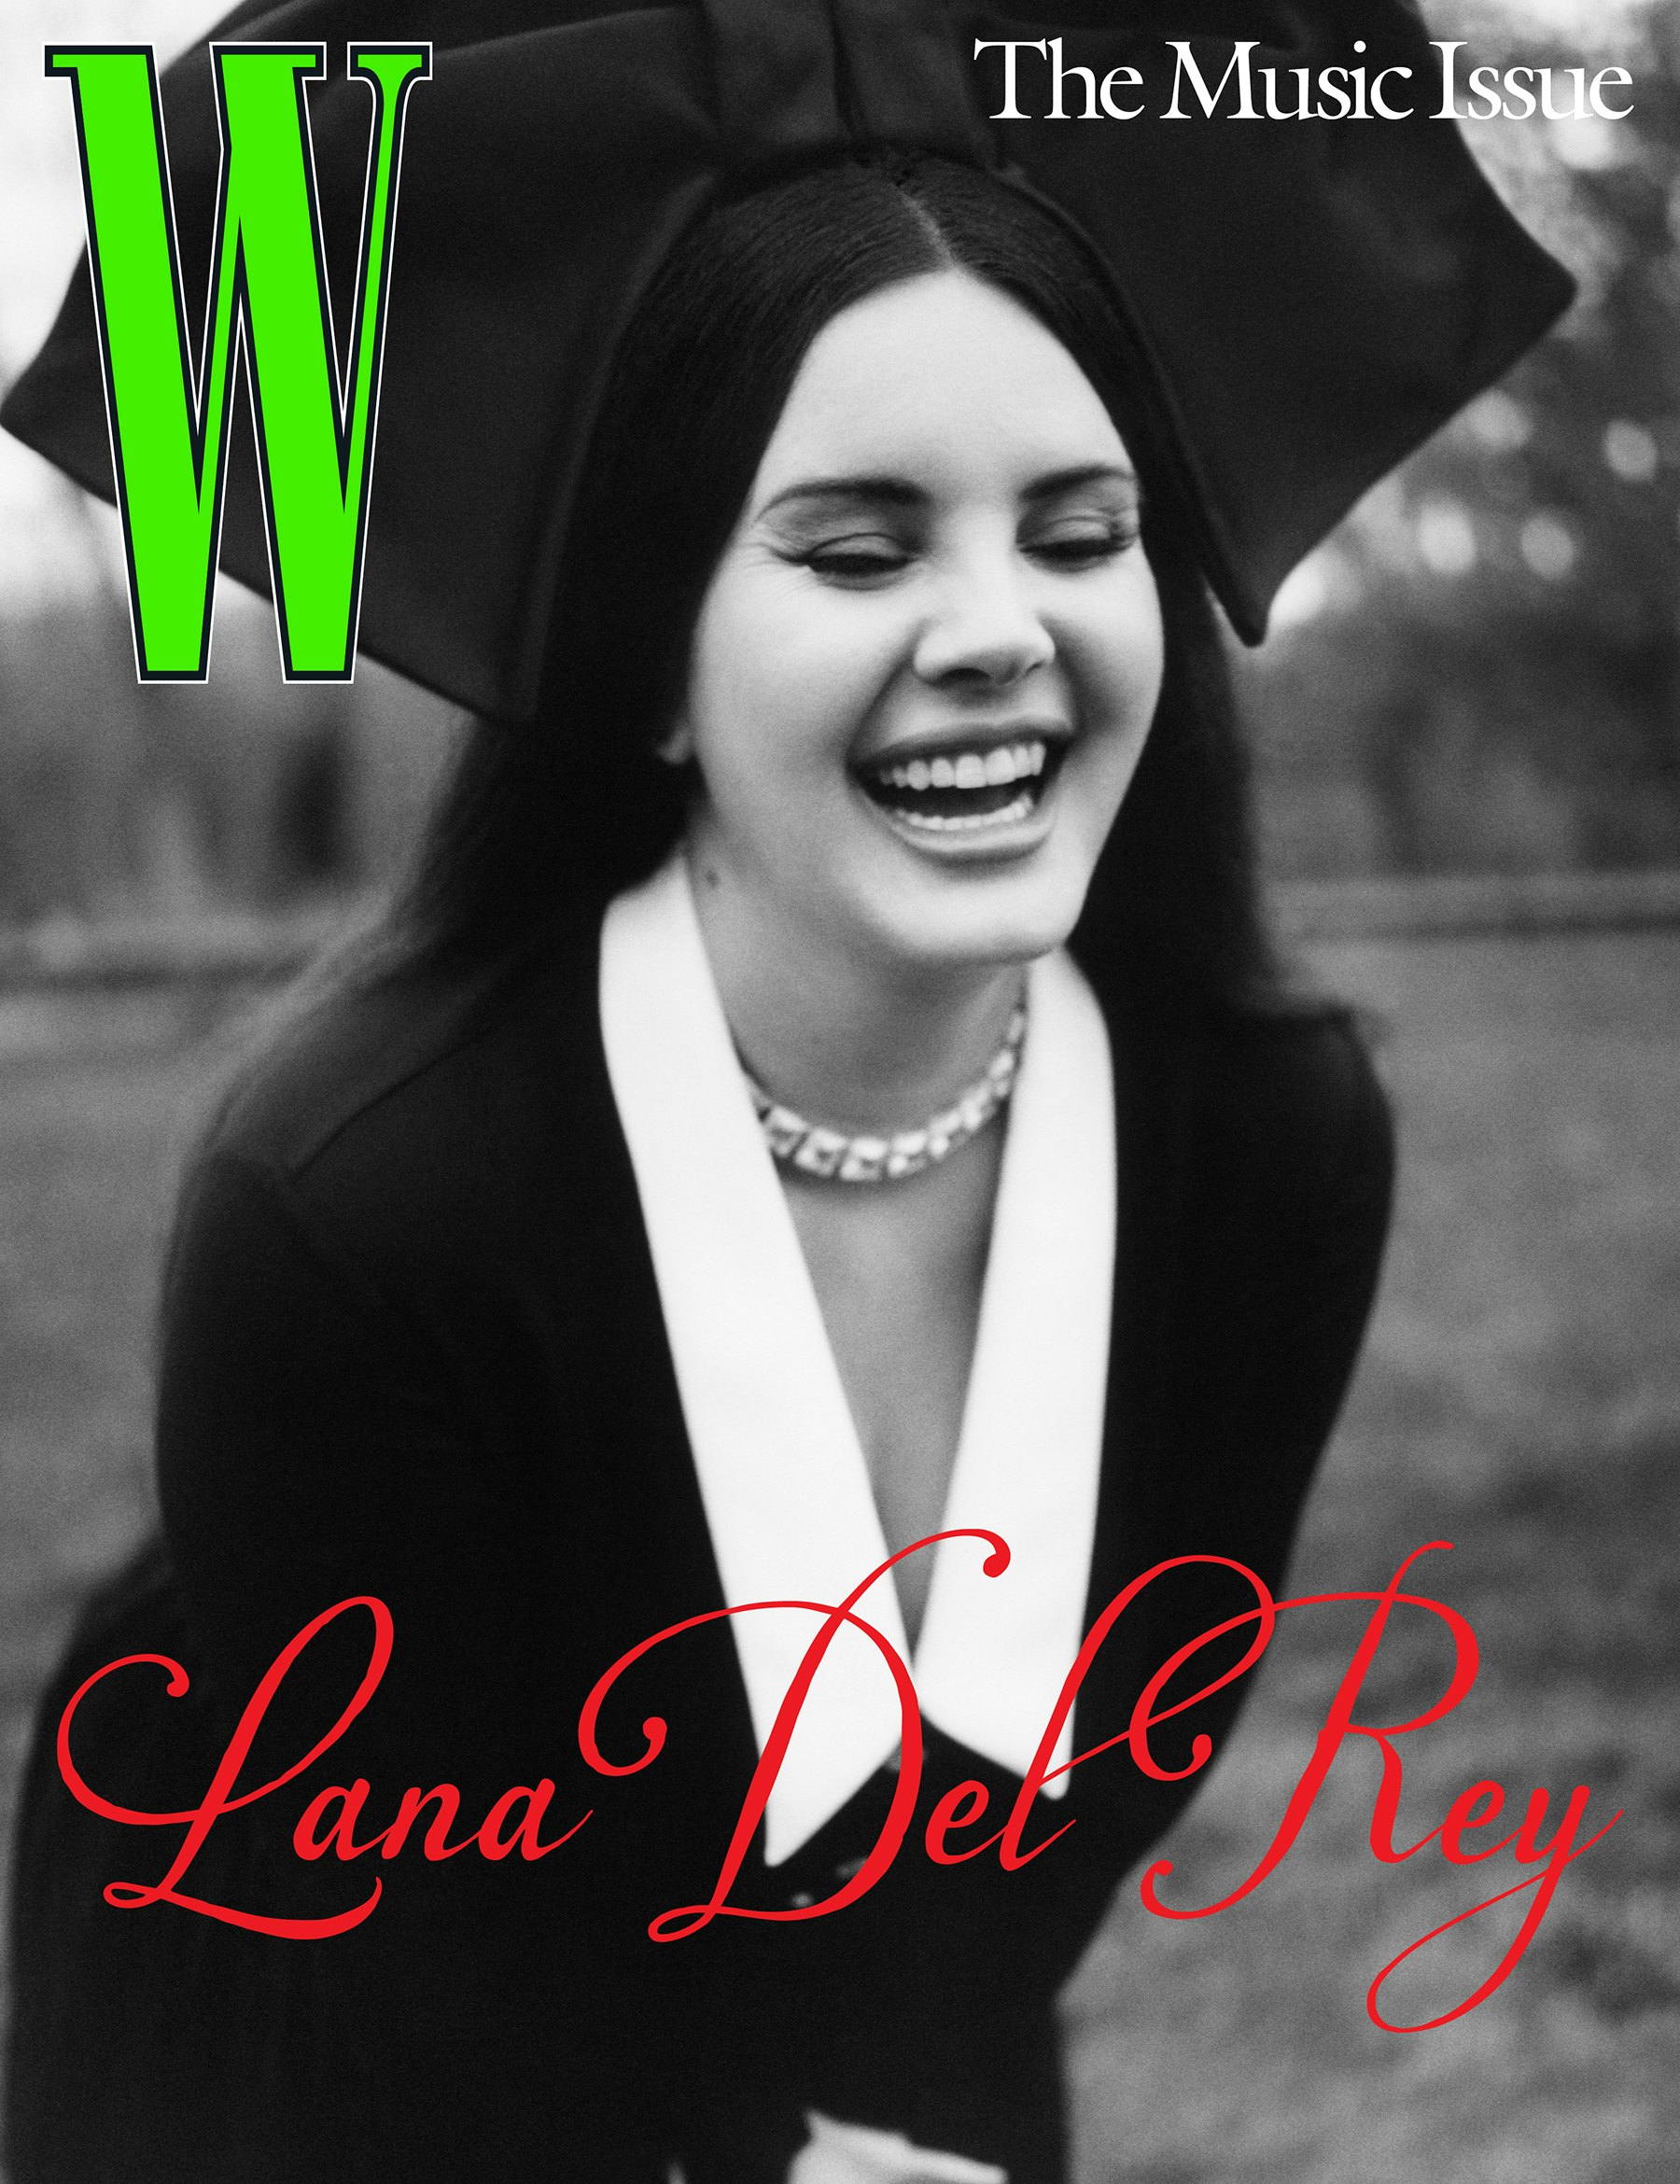 Lana Del Rey Talks New Album, Studying Carl Jung, and Lessons in Fame